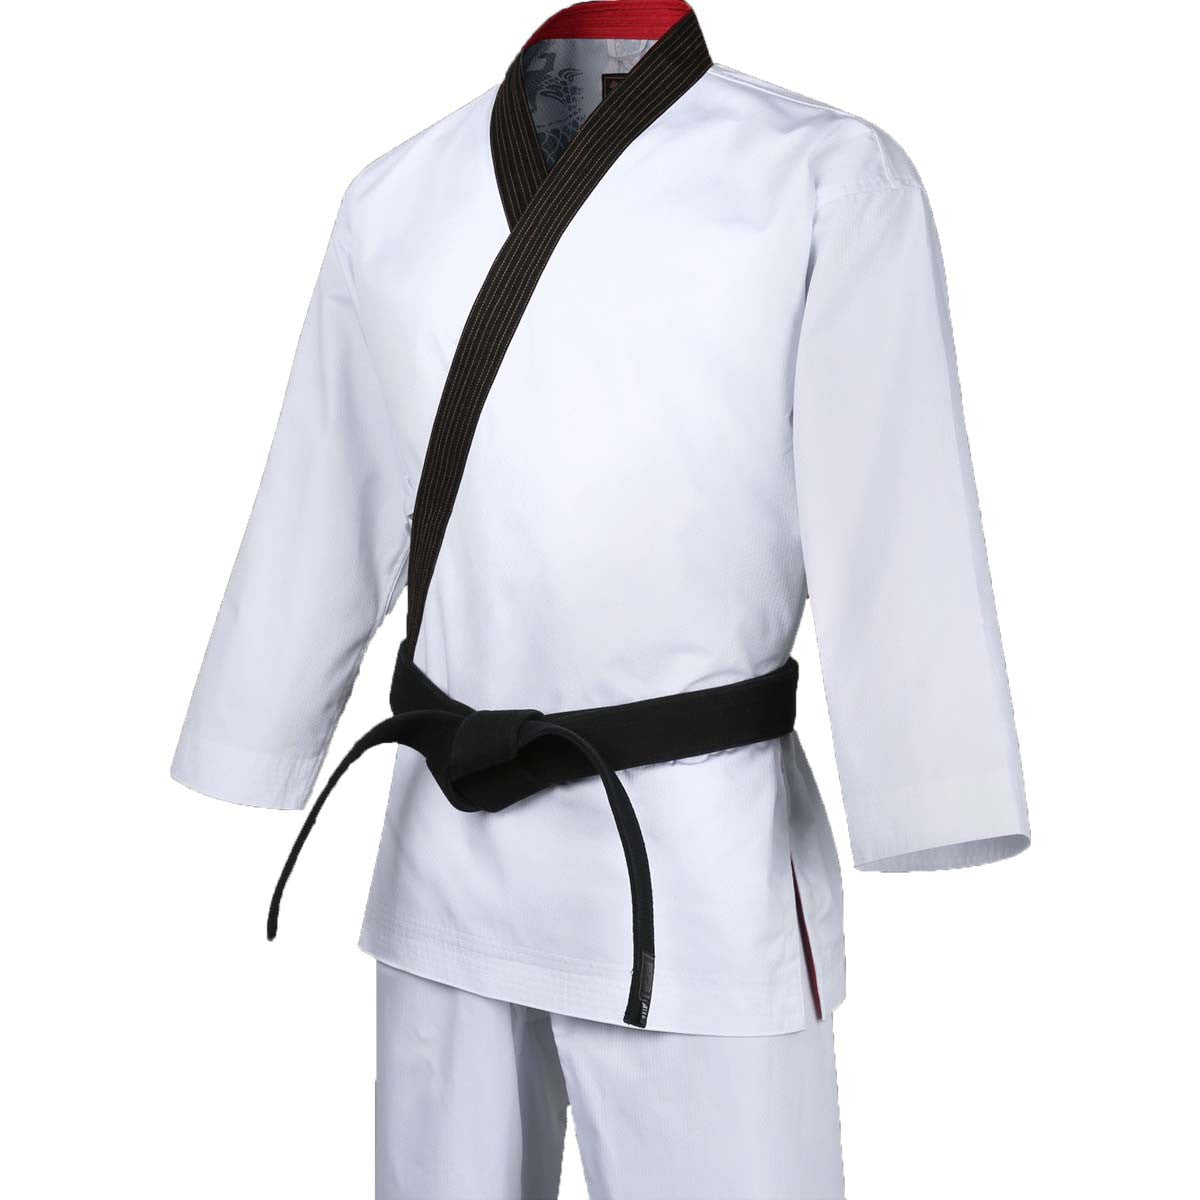 Mooto Grand Master Geum Gang Uniform White with Black Neck from Bytomic